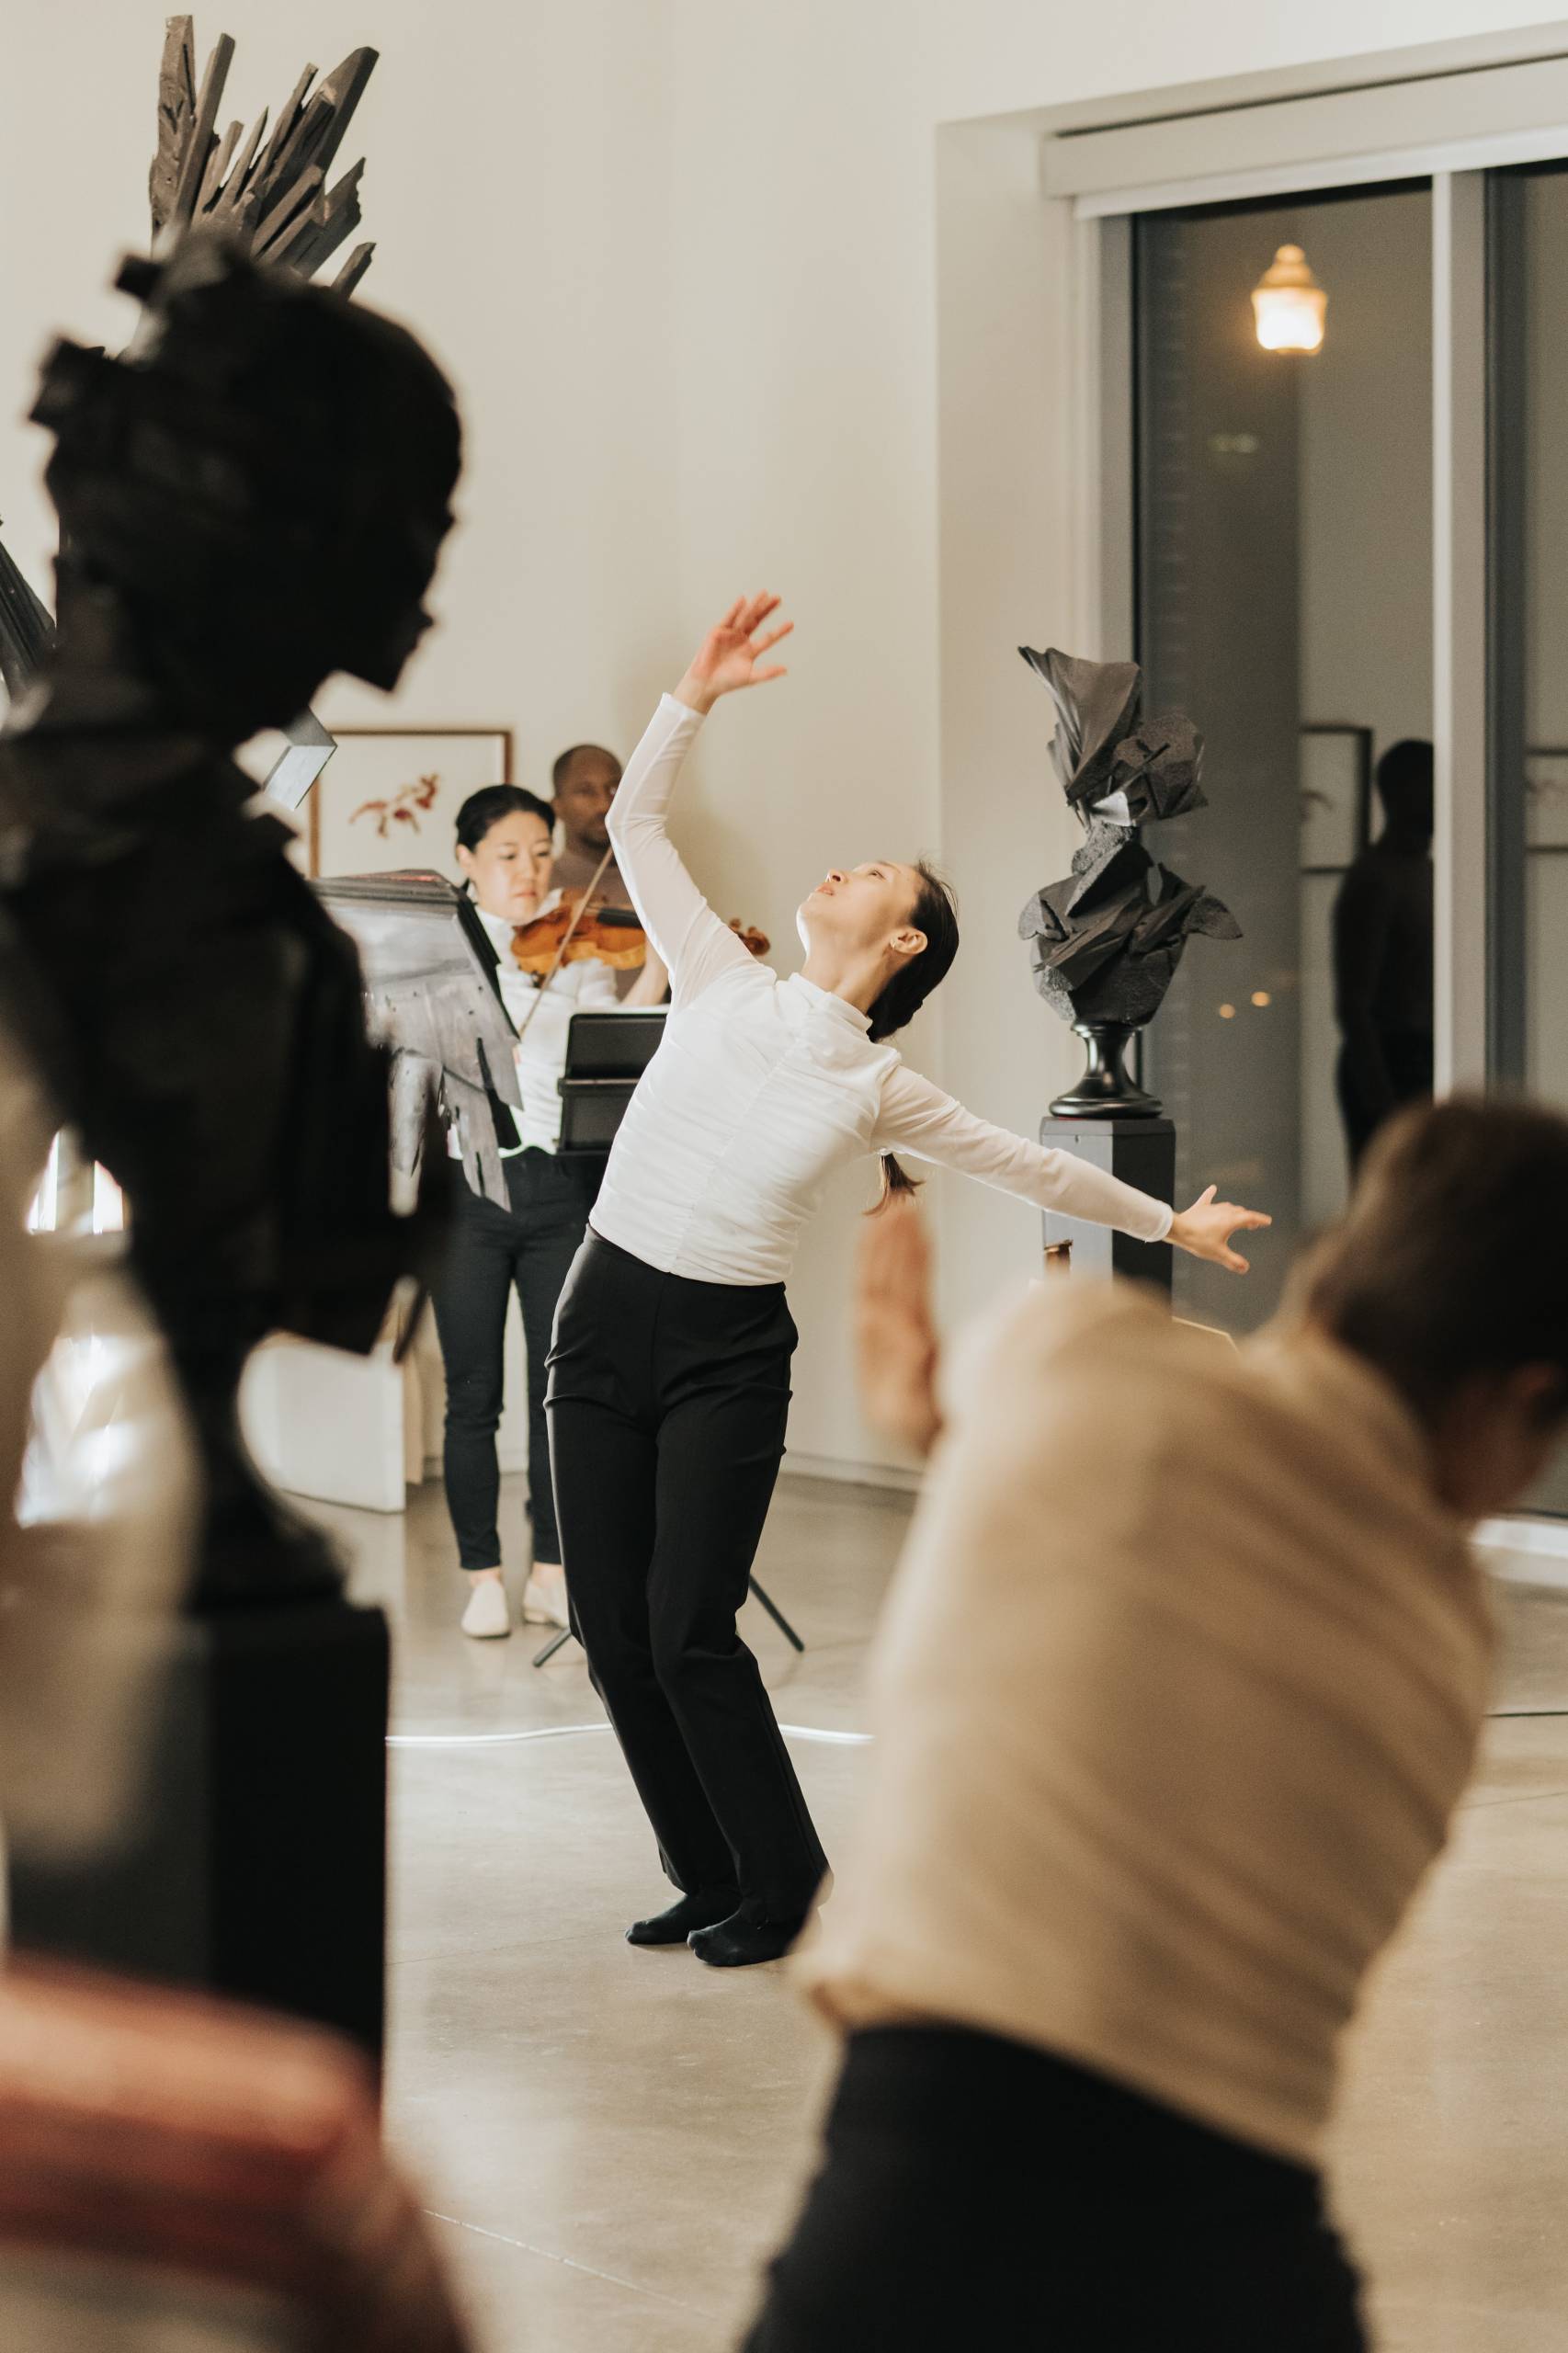 Members of performance ensemble Flyover Dance Collective perform in the 21c Hotel and Museum galleries.